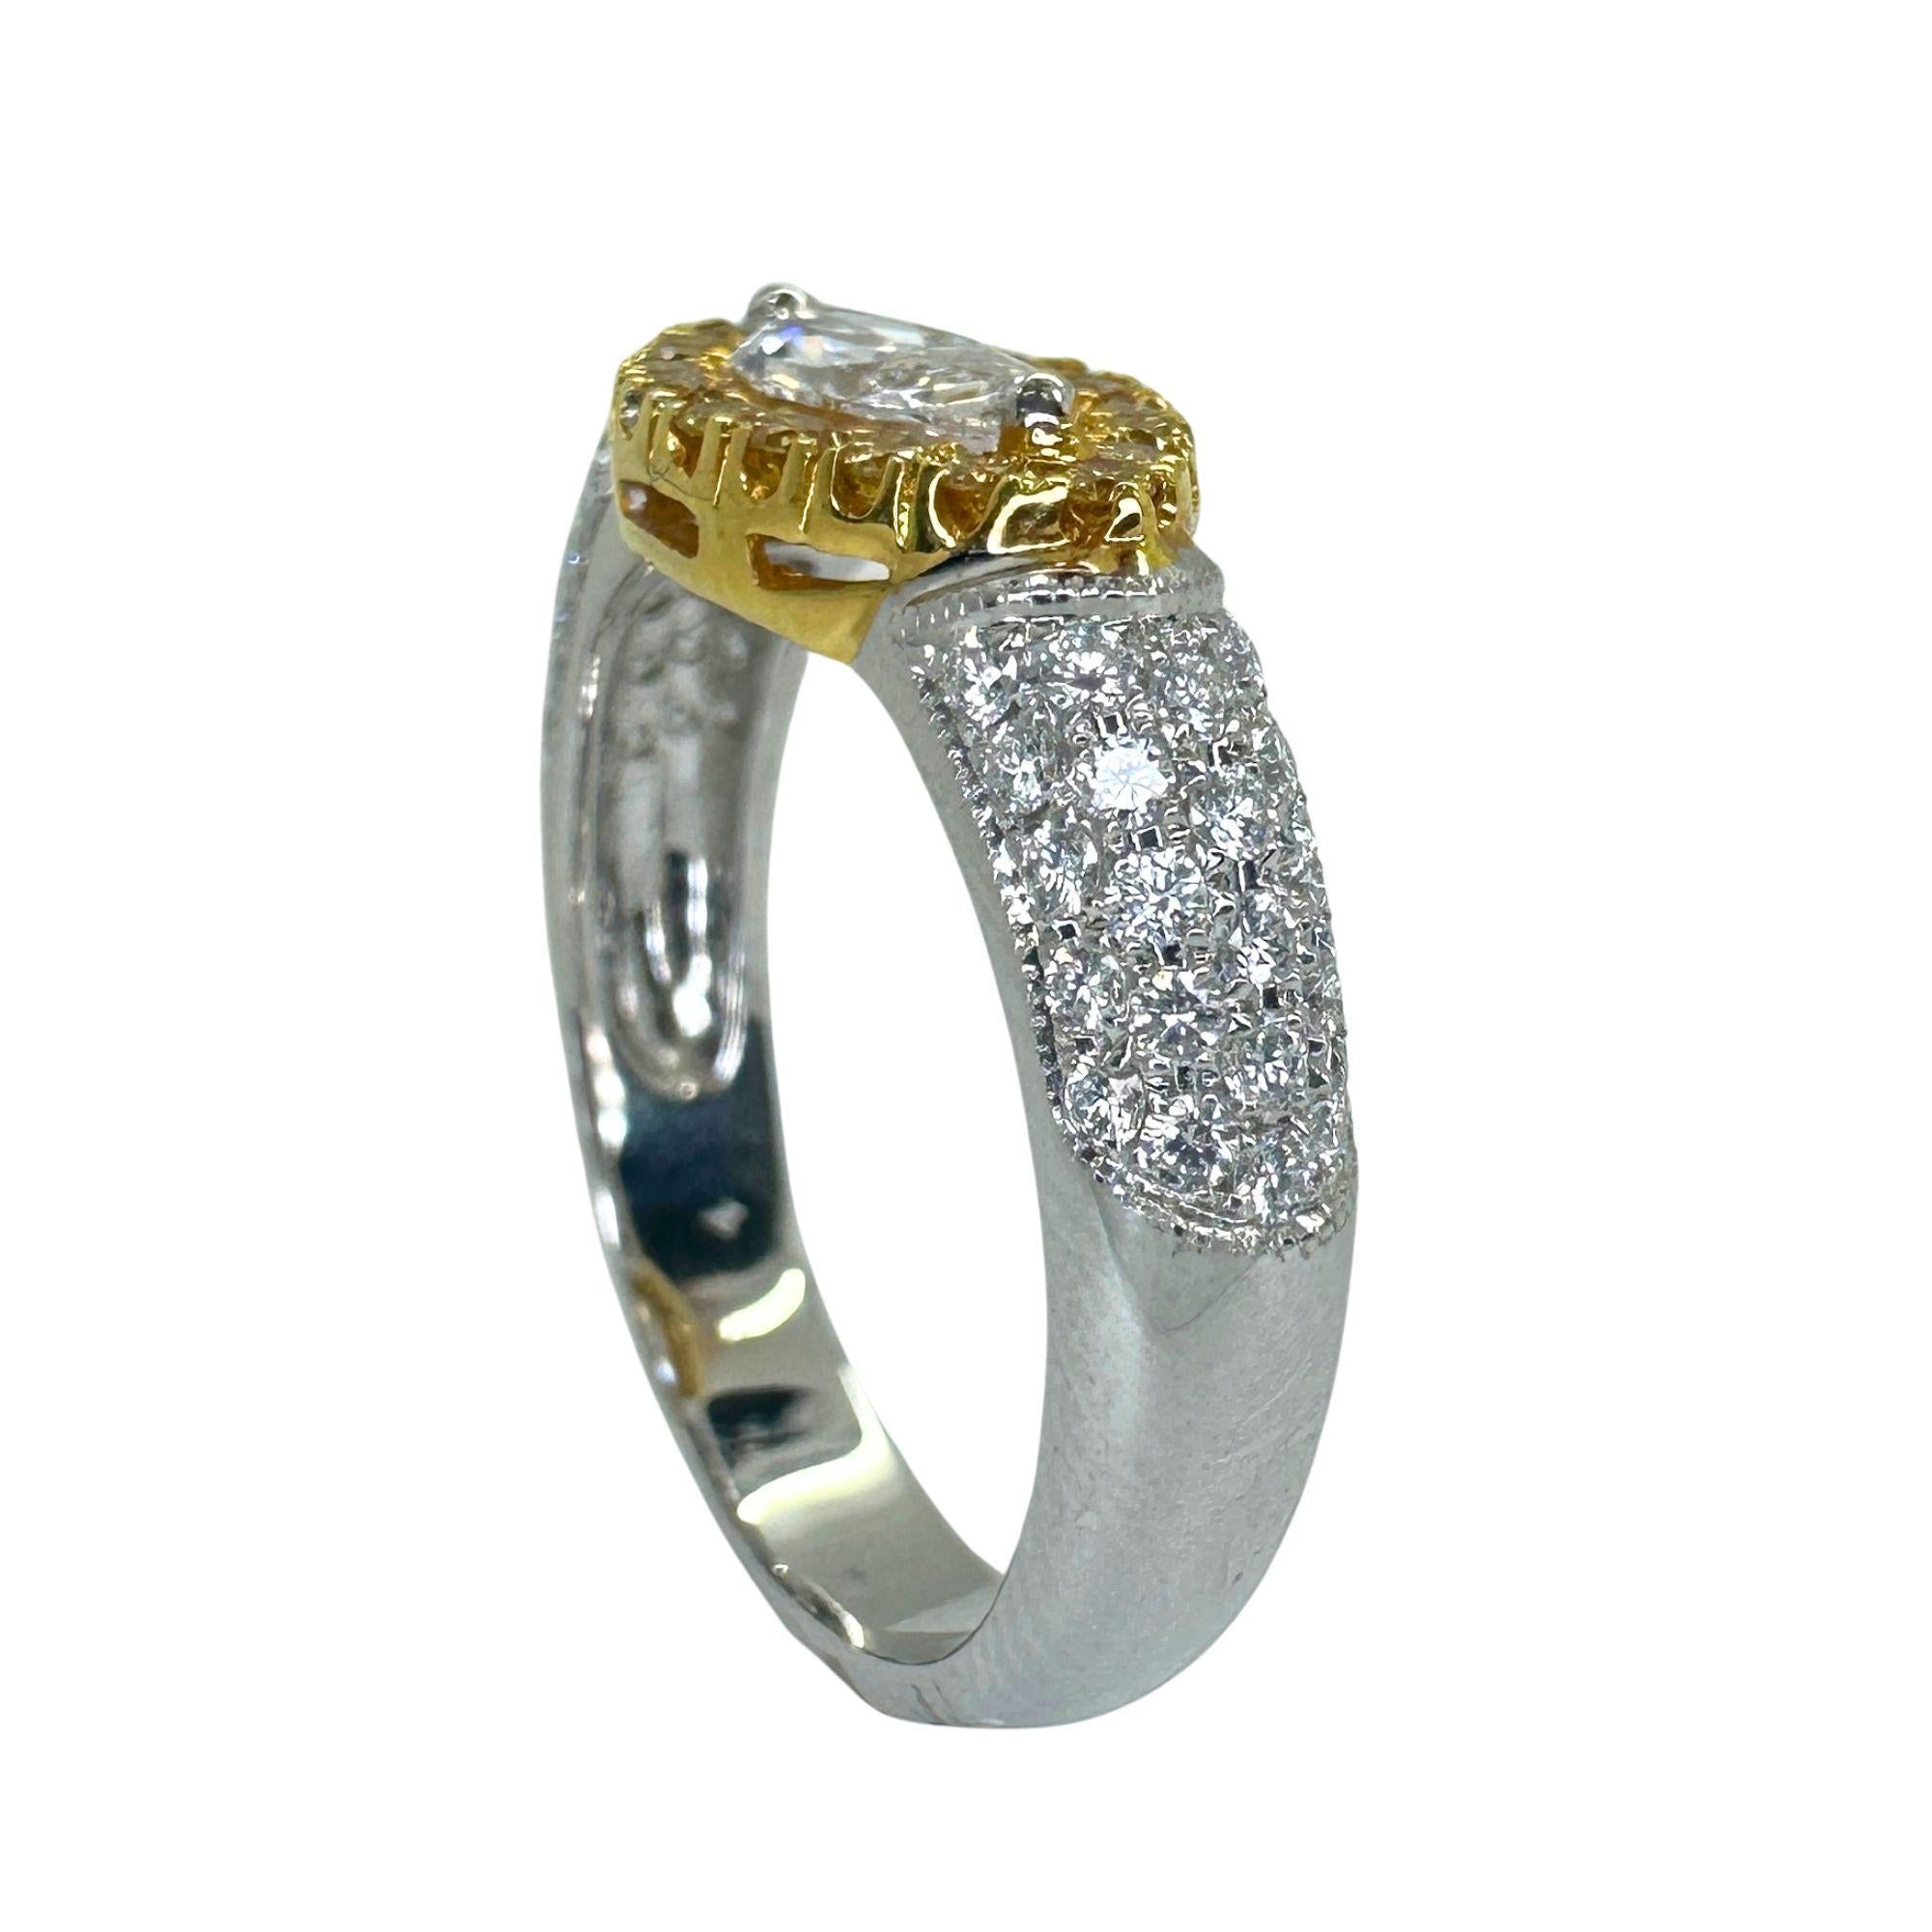 18k Ost-West Marquise-Diamant-Halo-Ring mit gelbem Diamanten in der Mitte und gelbem Diamant-Halo-Ring im Zustand „Gut“ im Angebot in New York, NY